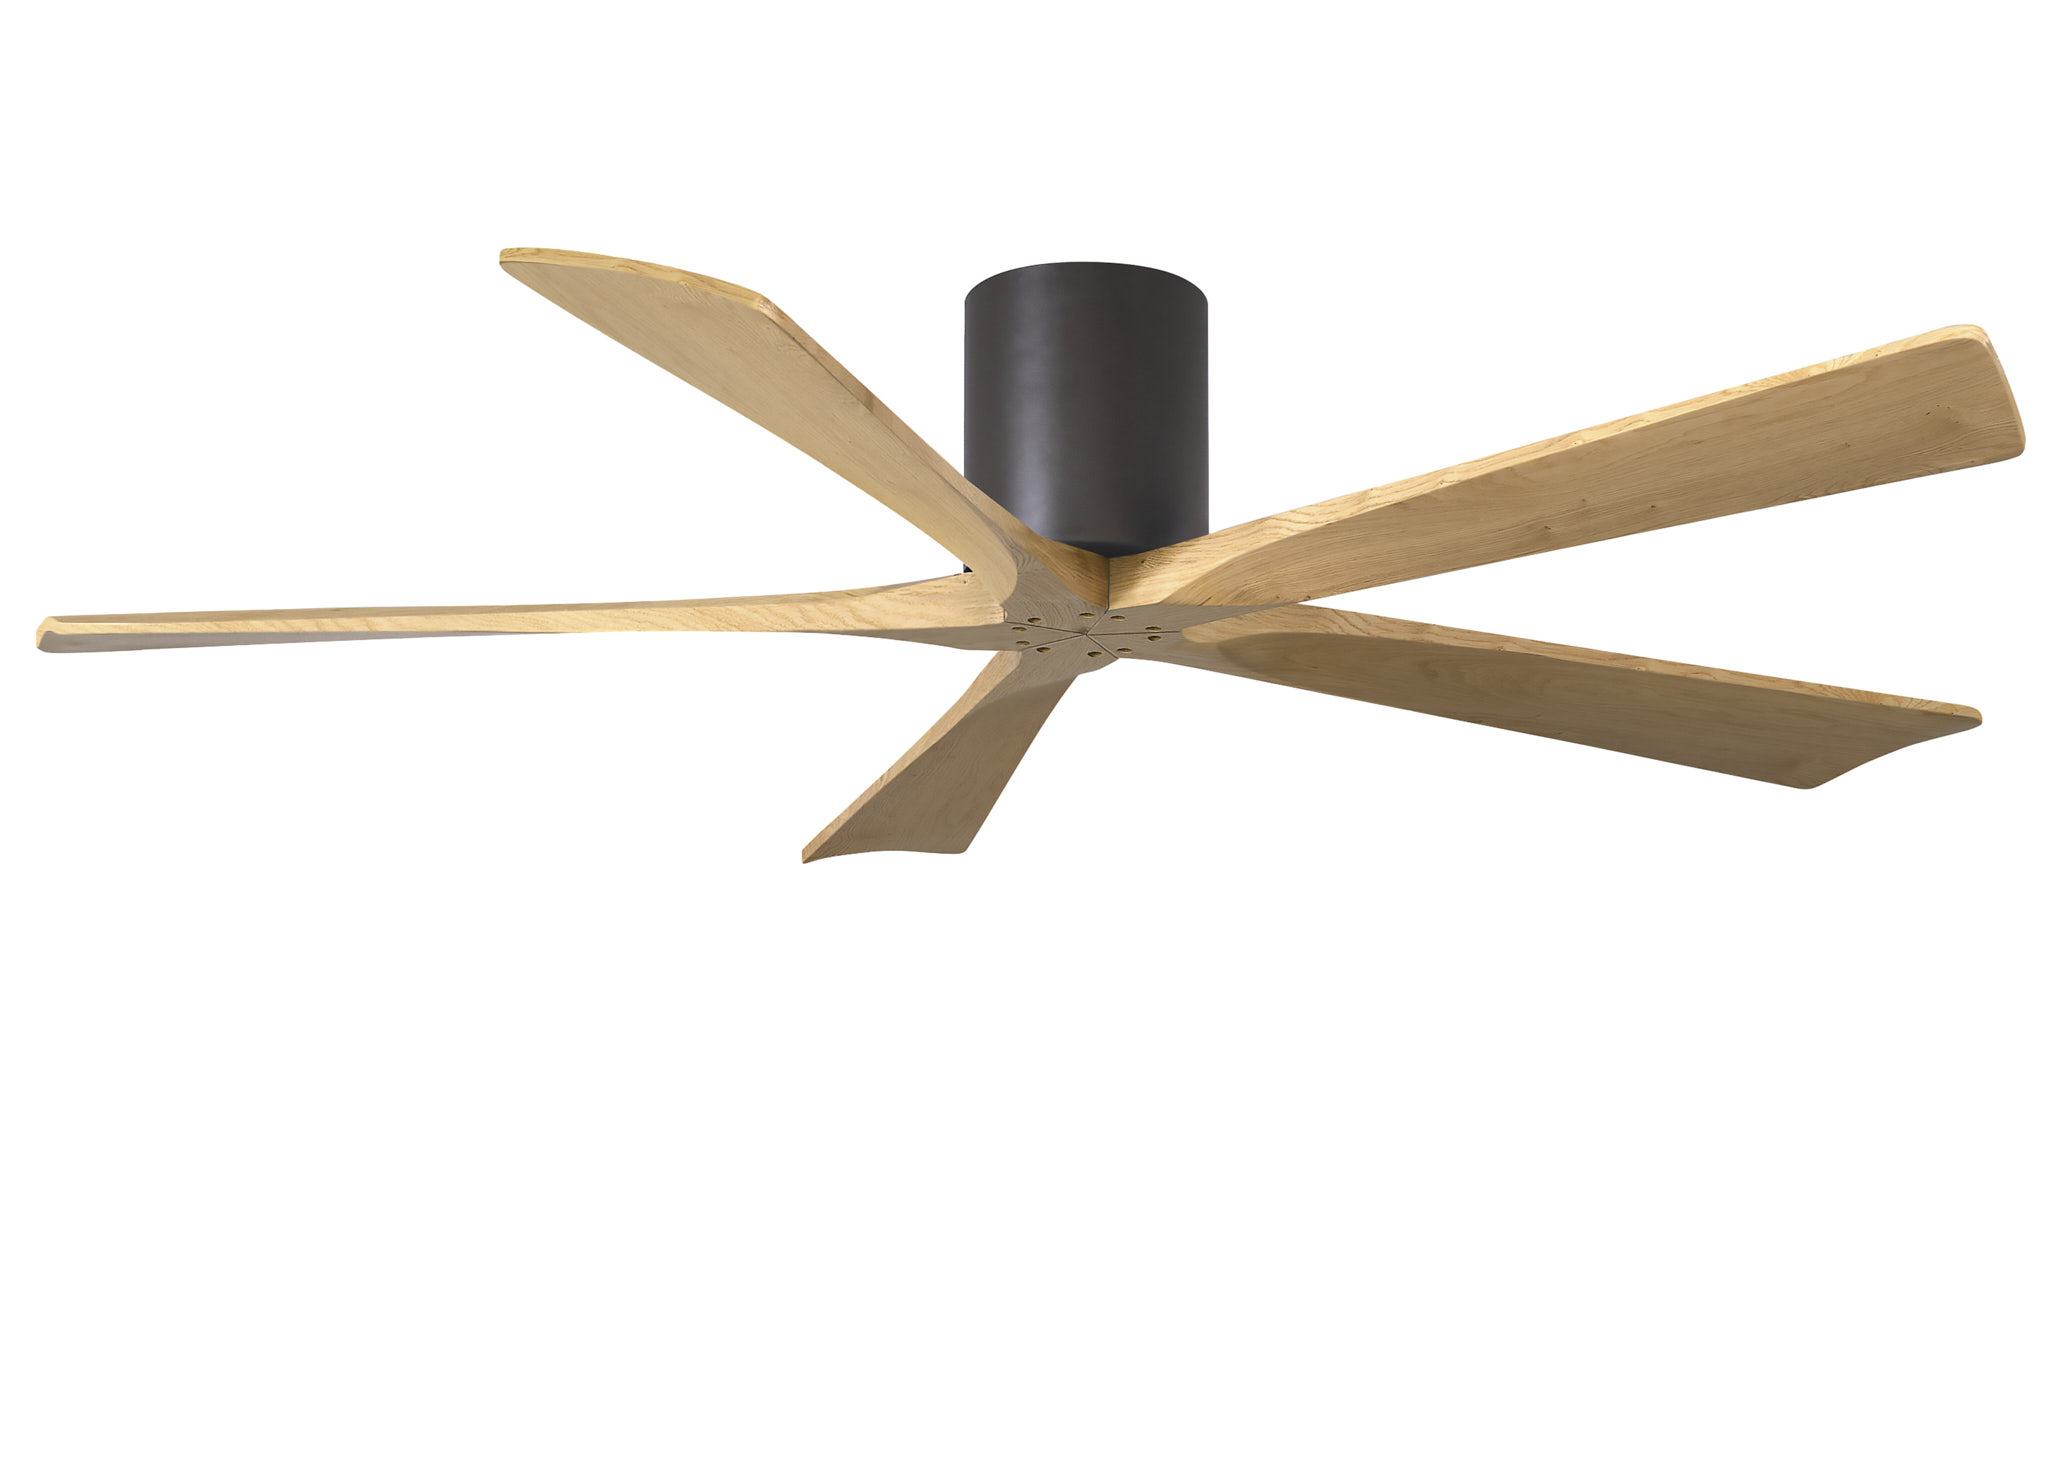 Irene-5H 6-speed ceiling fan in textured bronze finish with 60